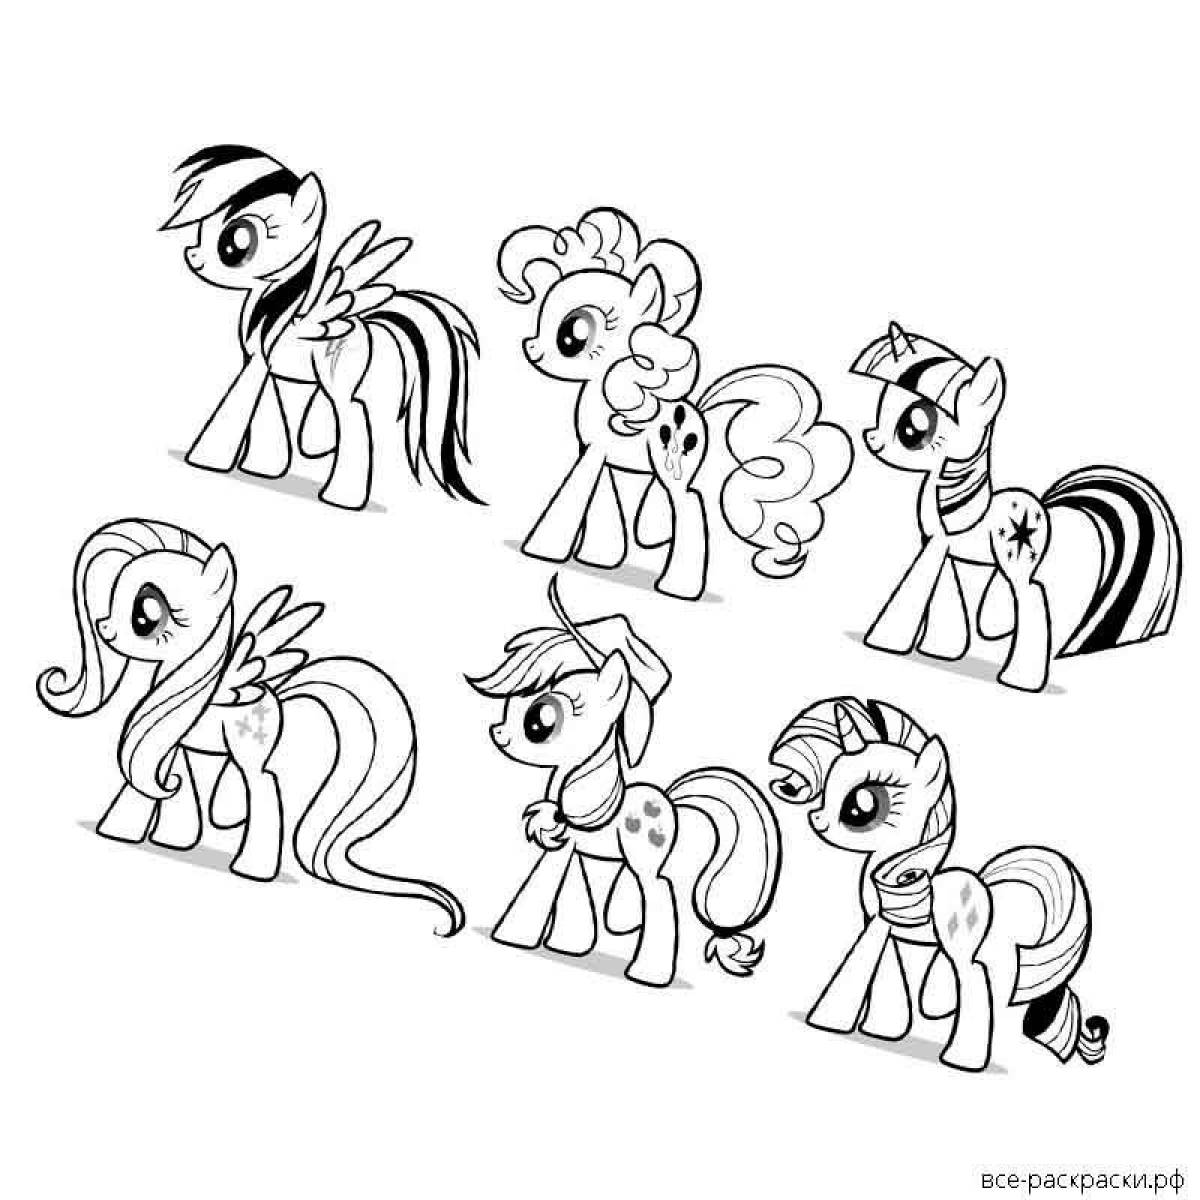 Next generation pony dazzling coloring page